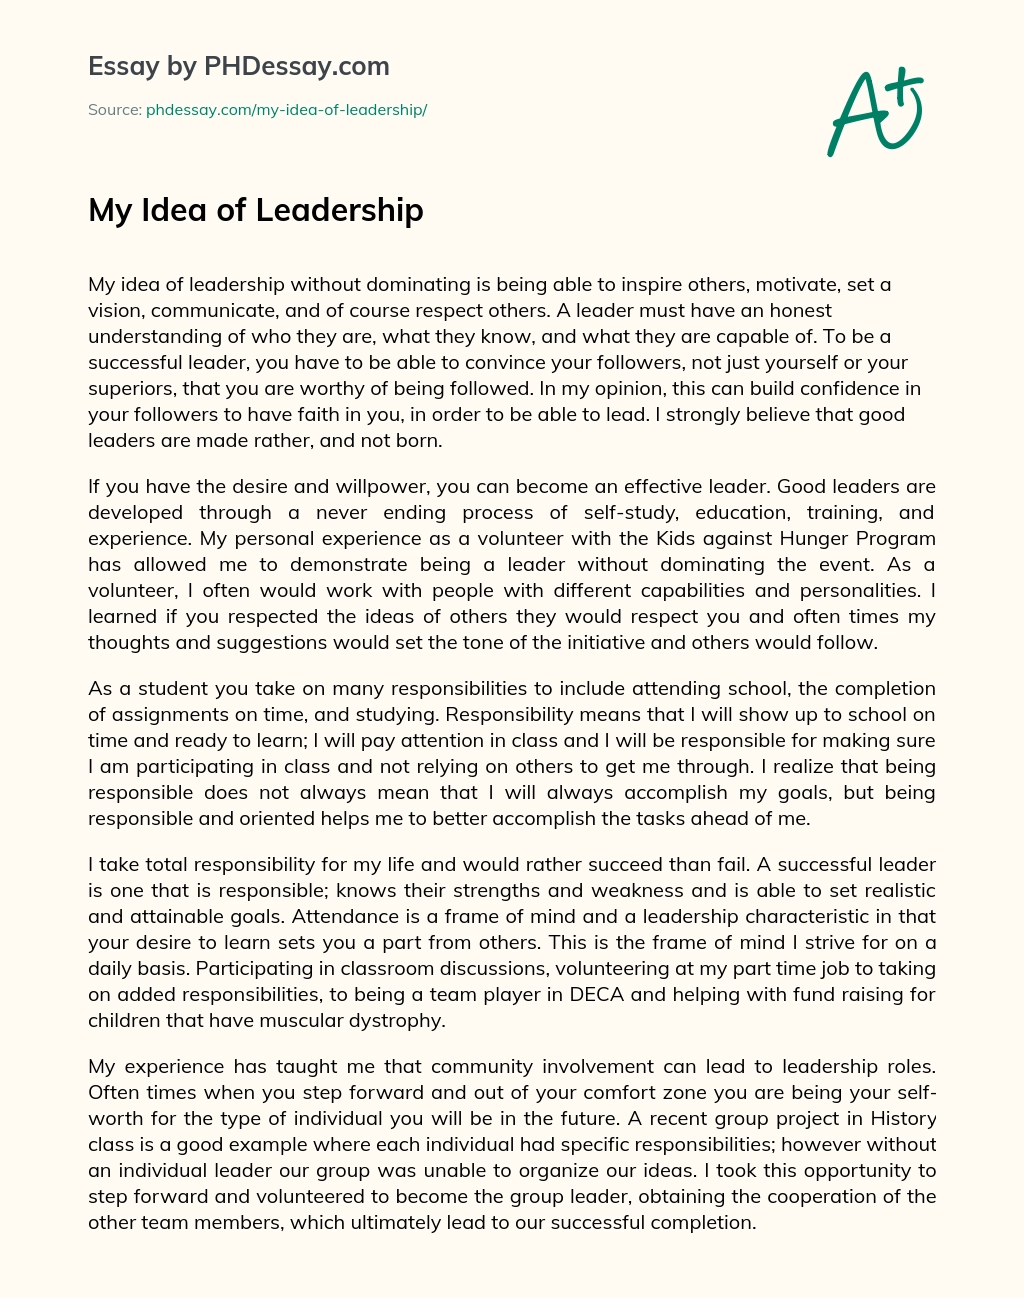 what does leadership mean to me essay